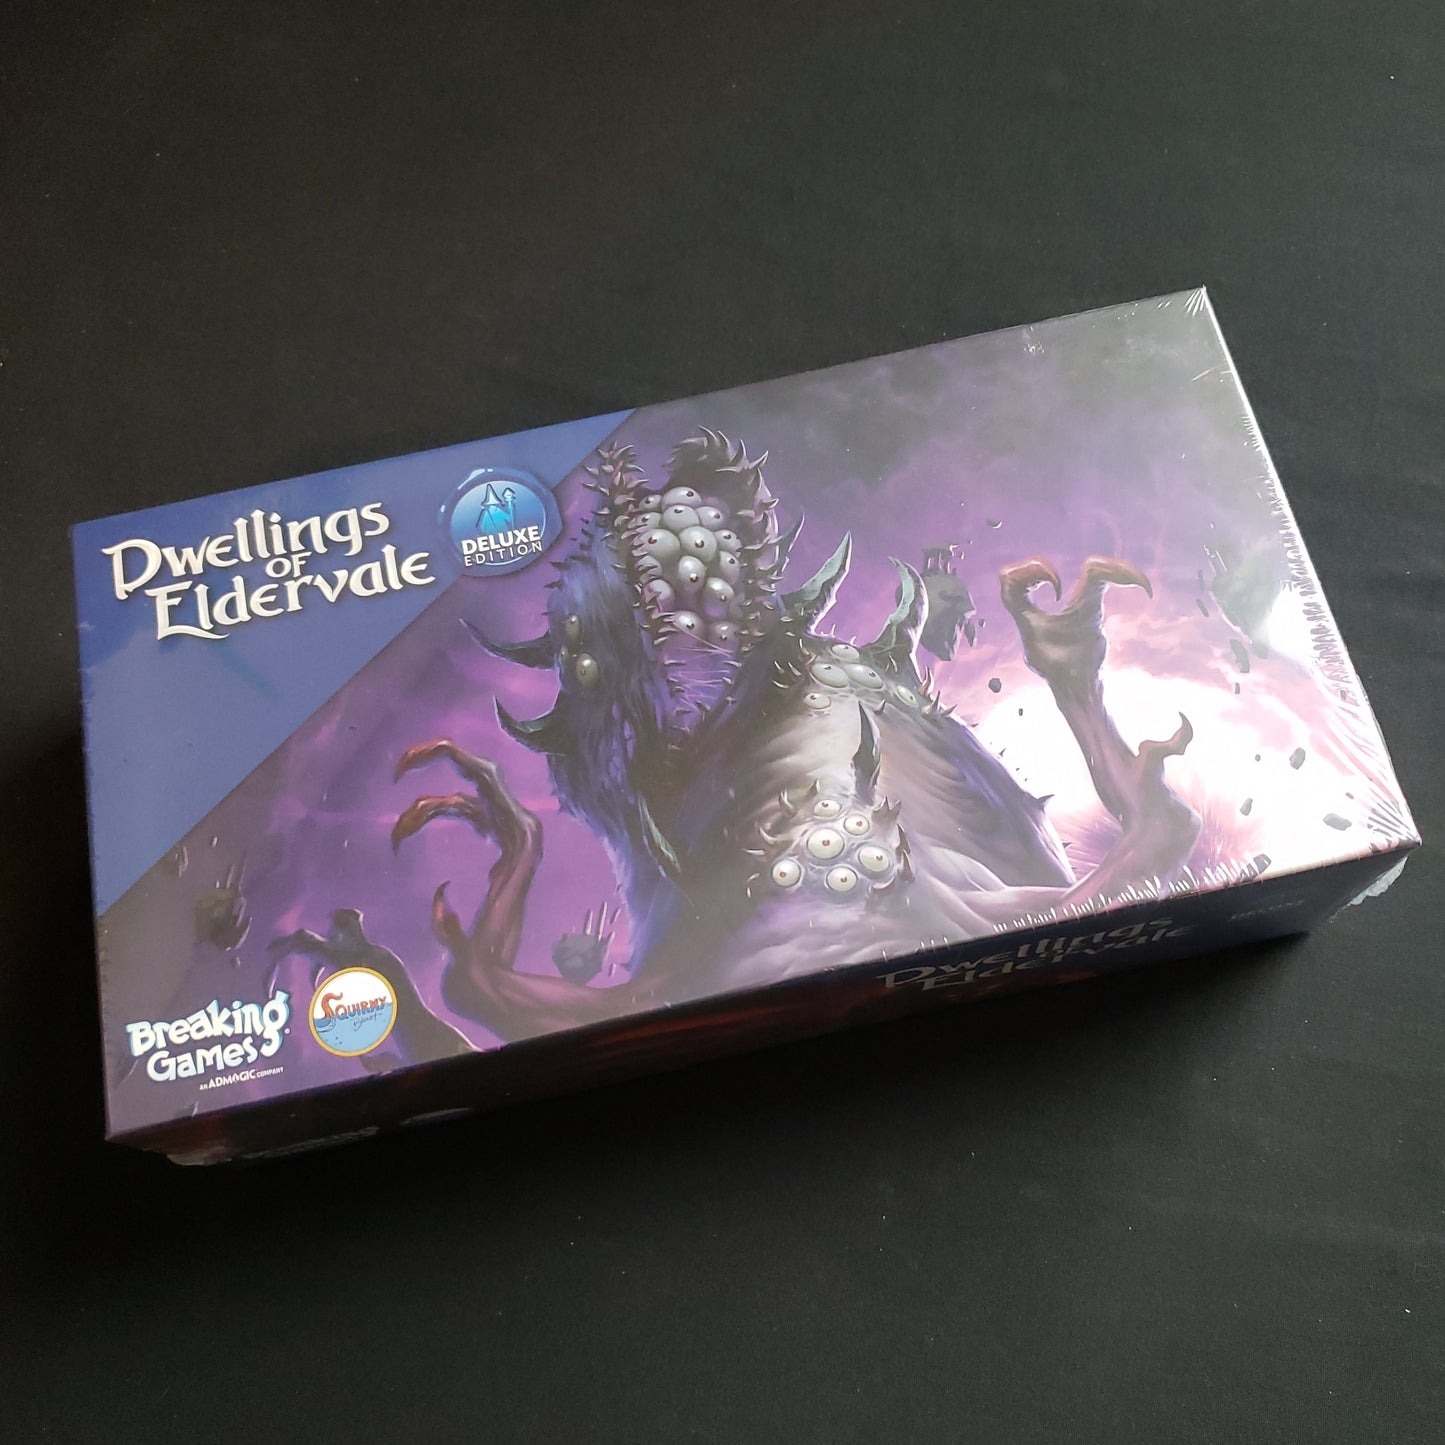 Image shows the front cover of the box of the deluxe Upgrade Pack for the board game Dwellings of Eldervale